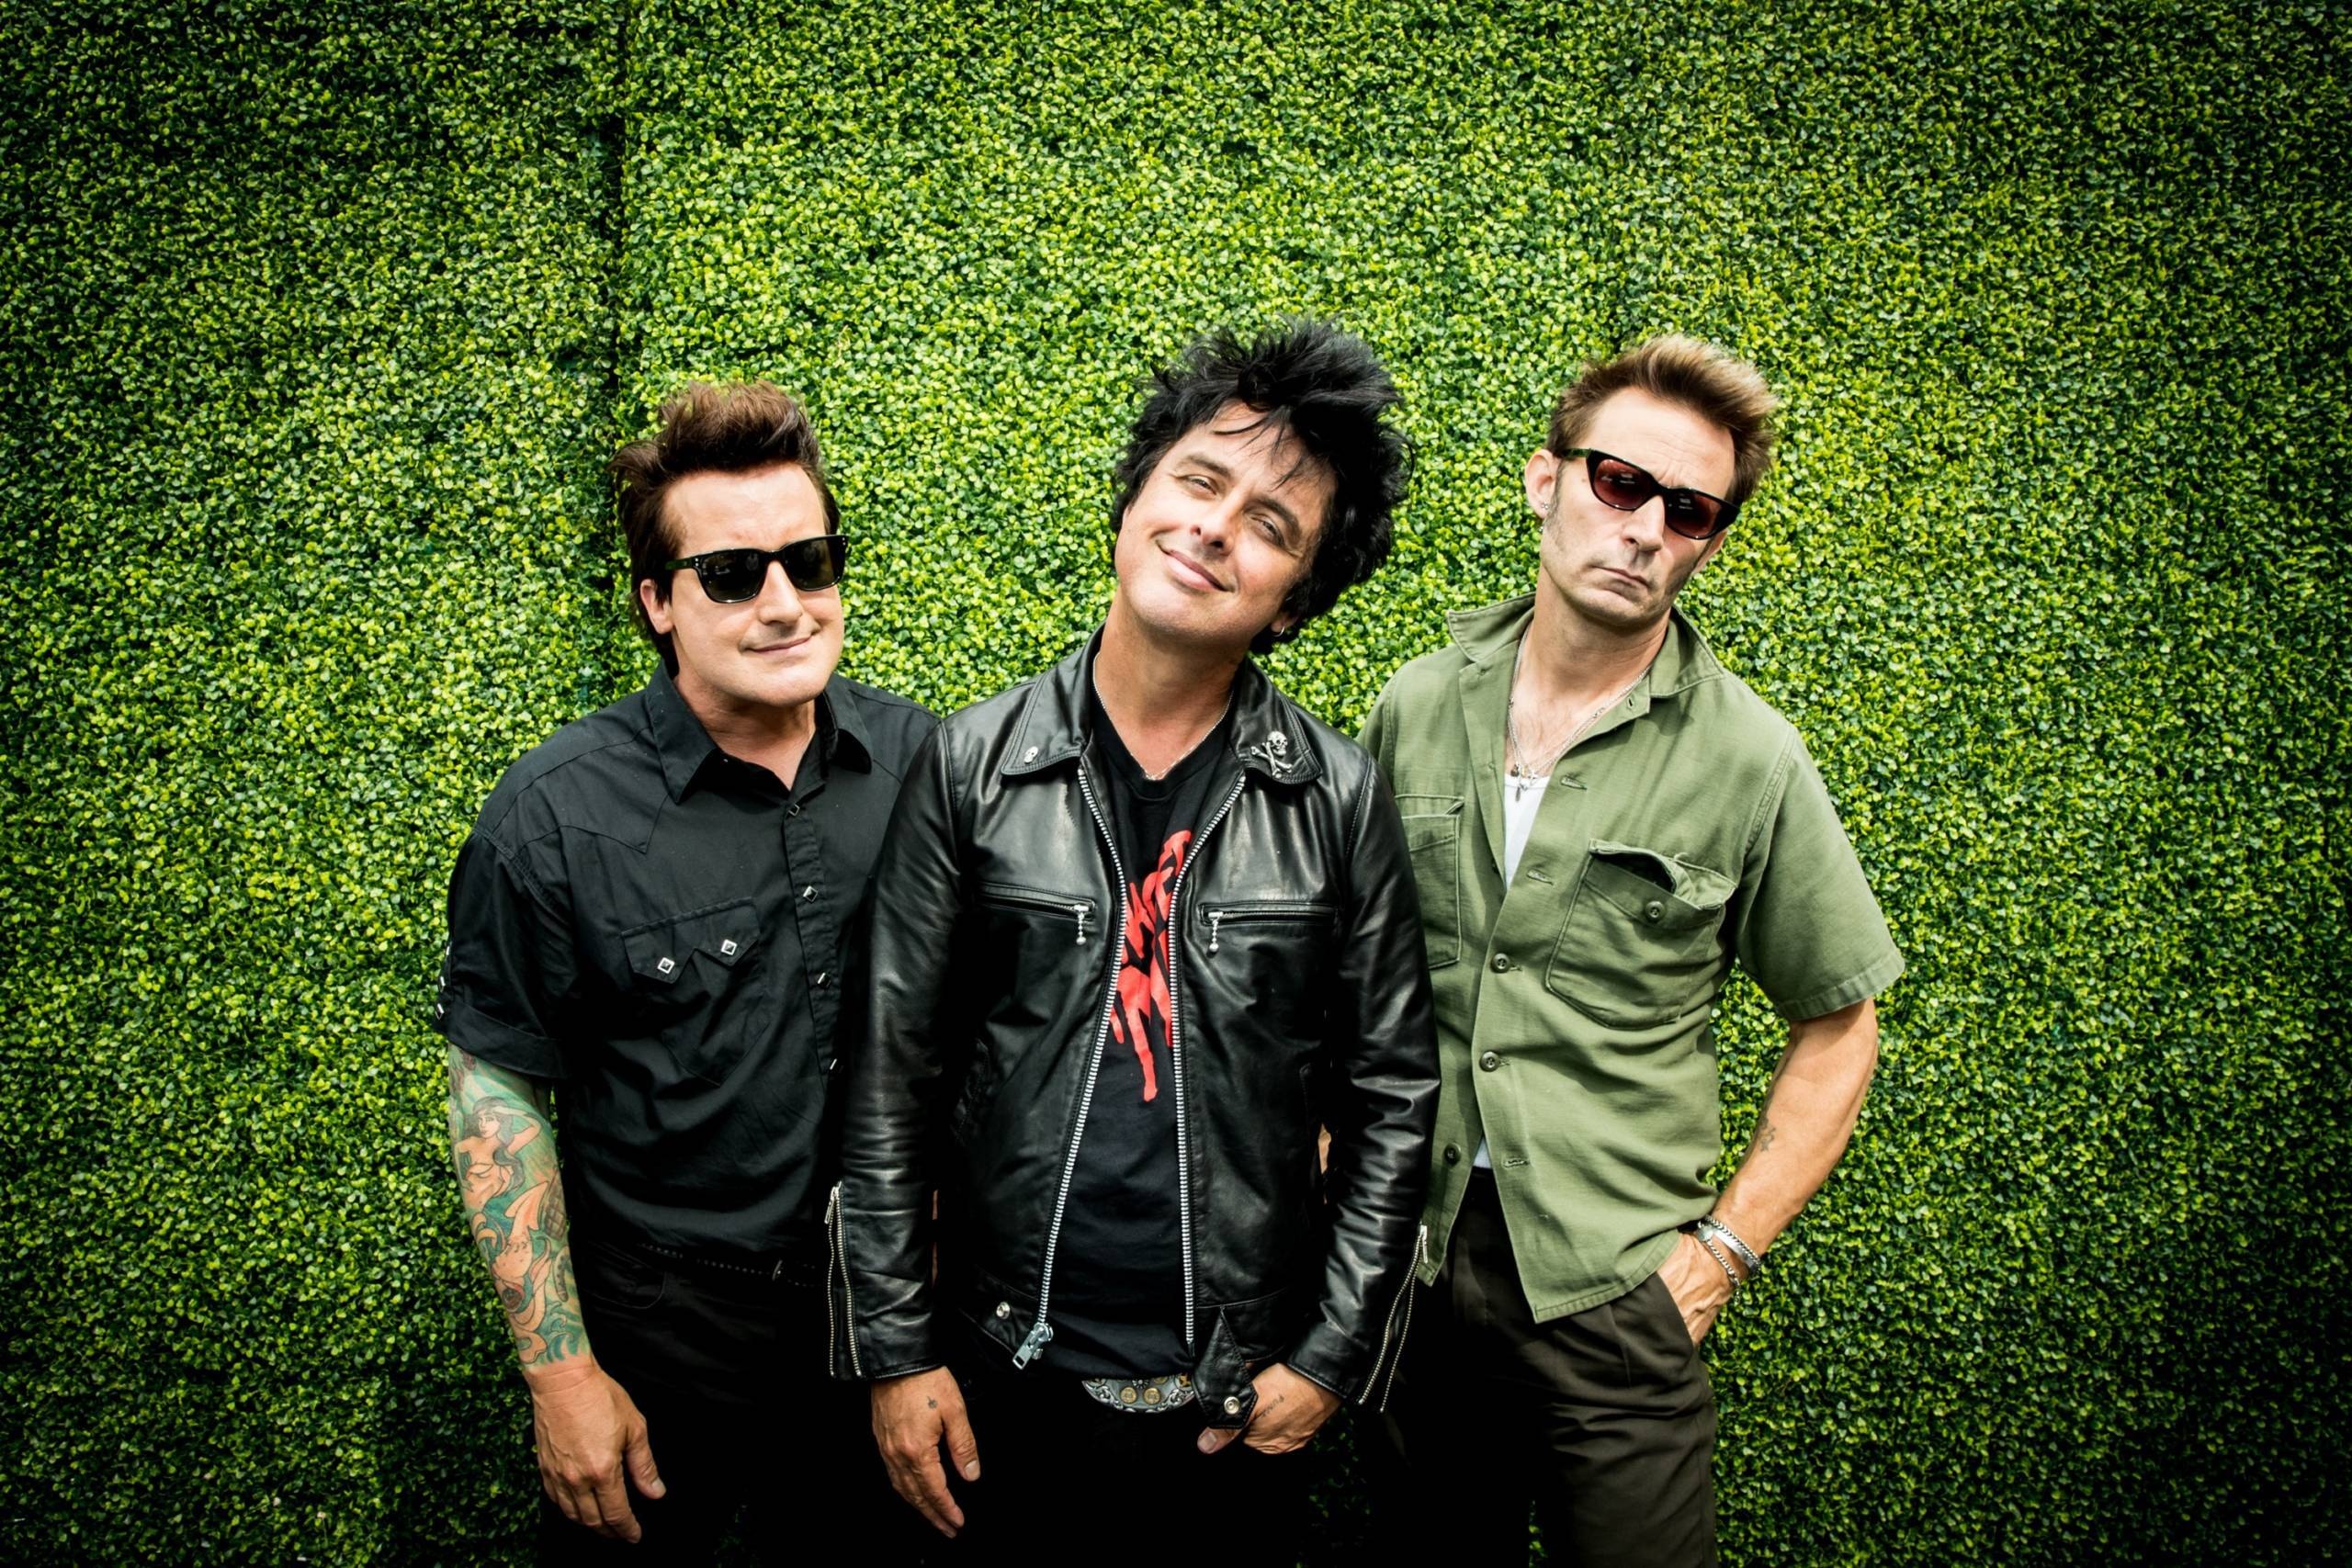 Green Day (Band): The debut studio album, 39/Smooth, was released on April 13, 1990. 2560x1710 HD Background.